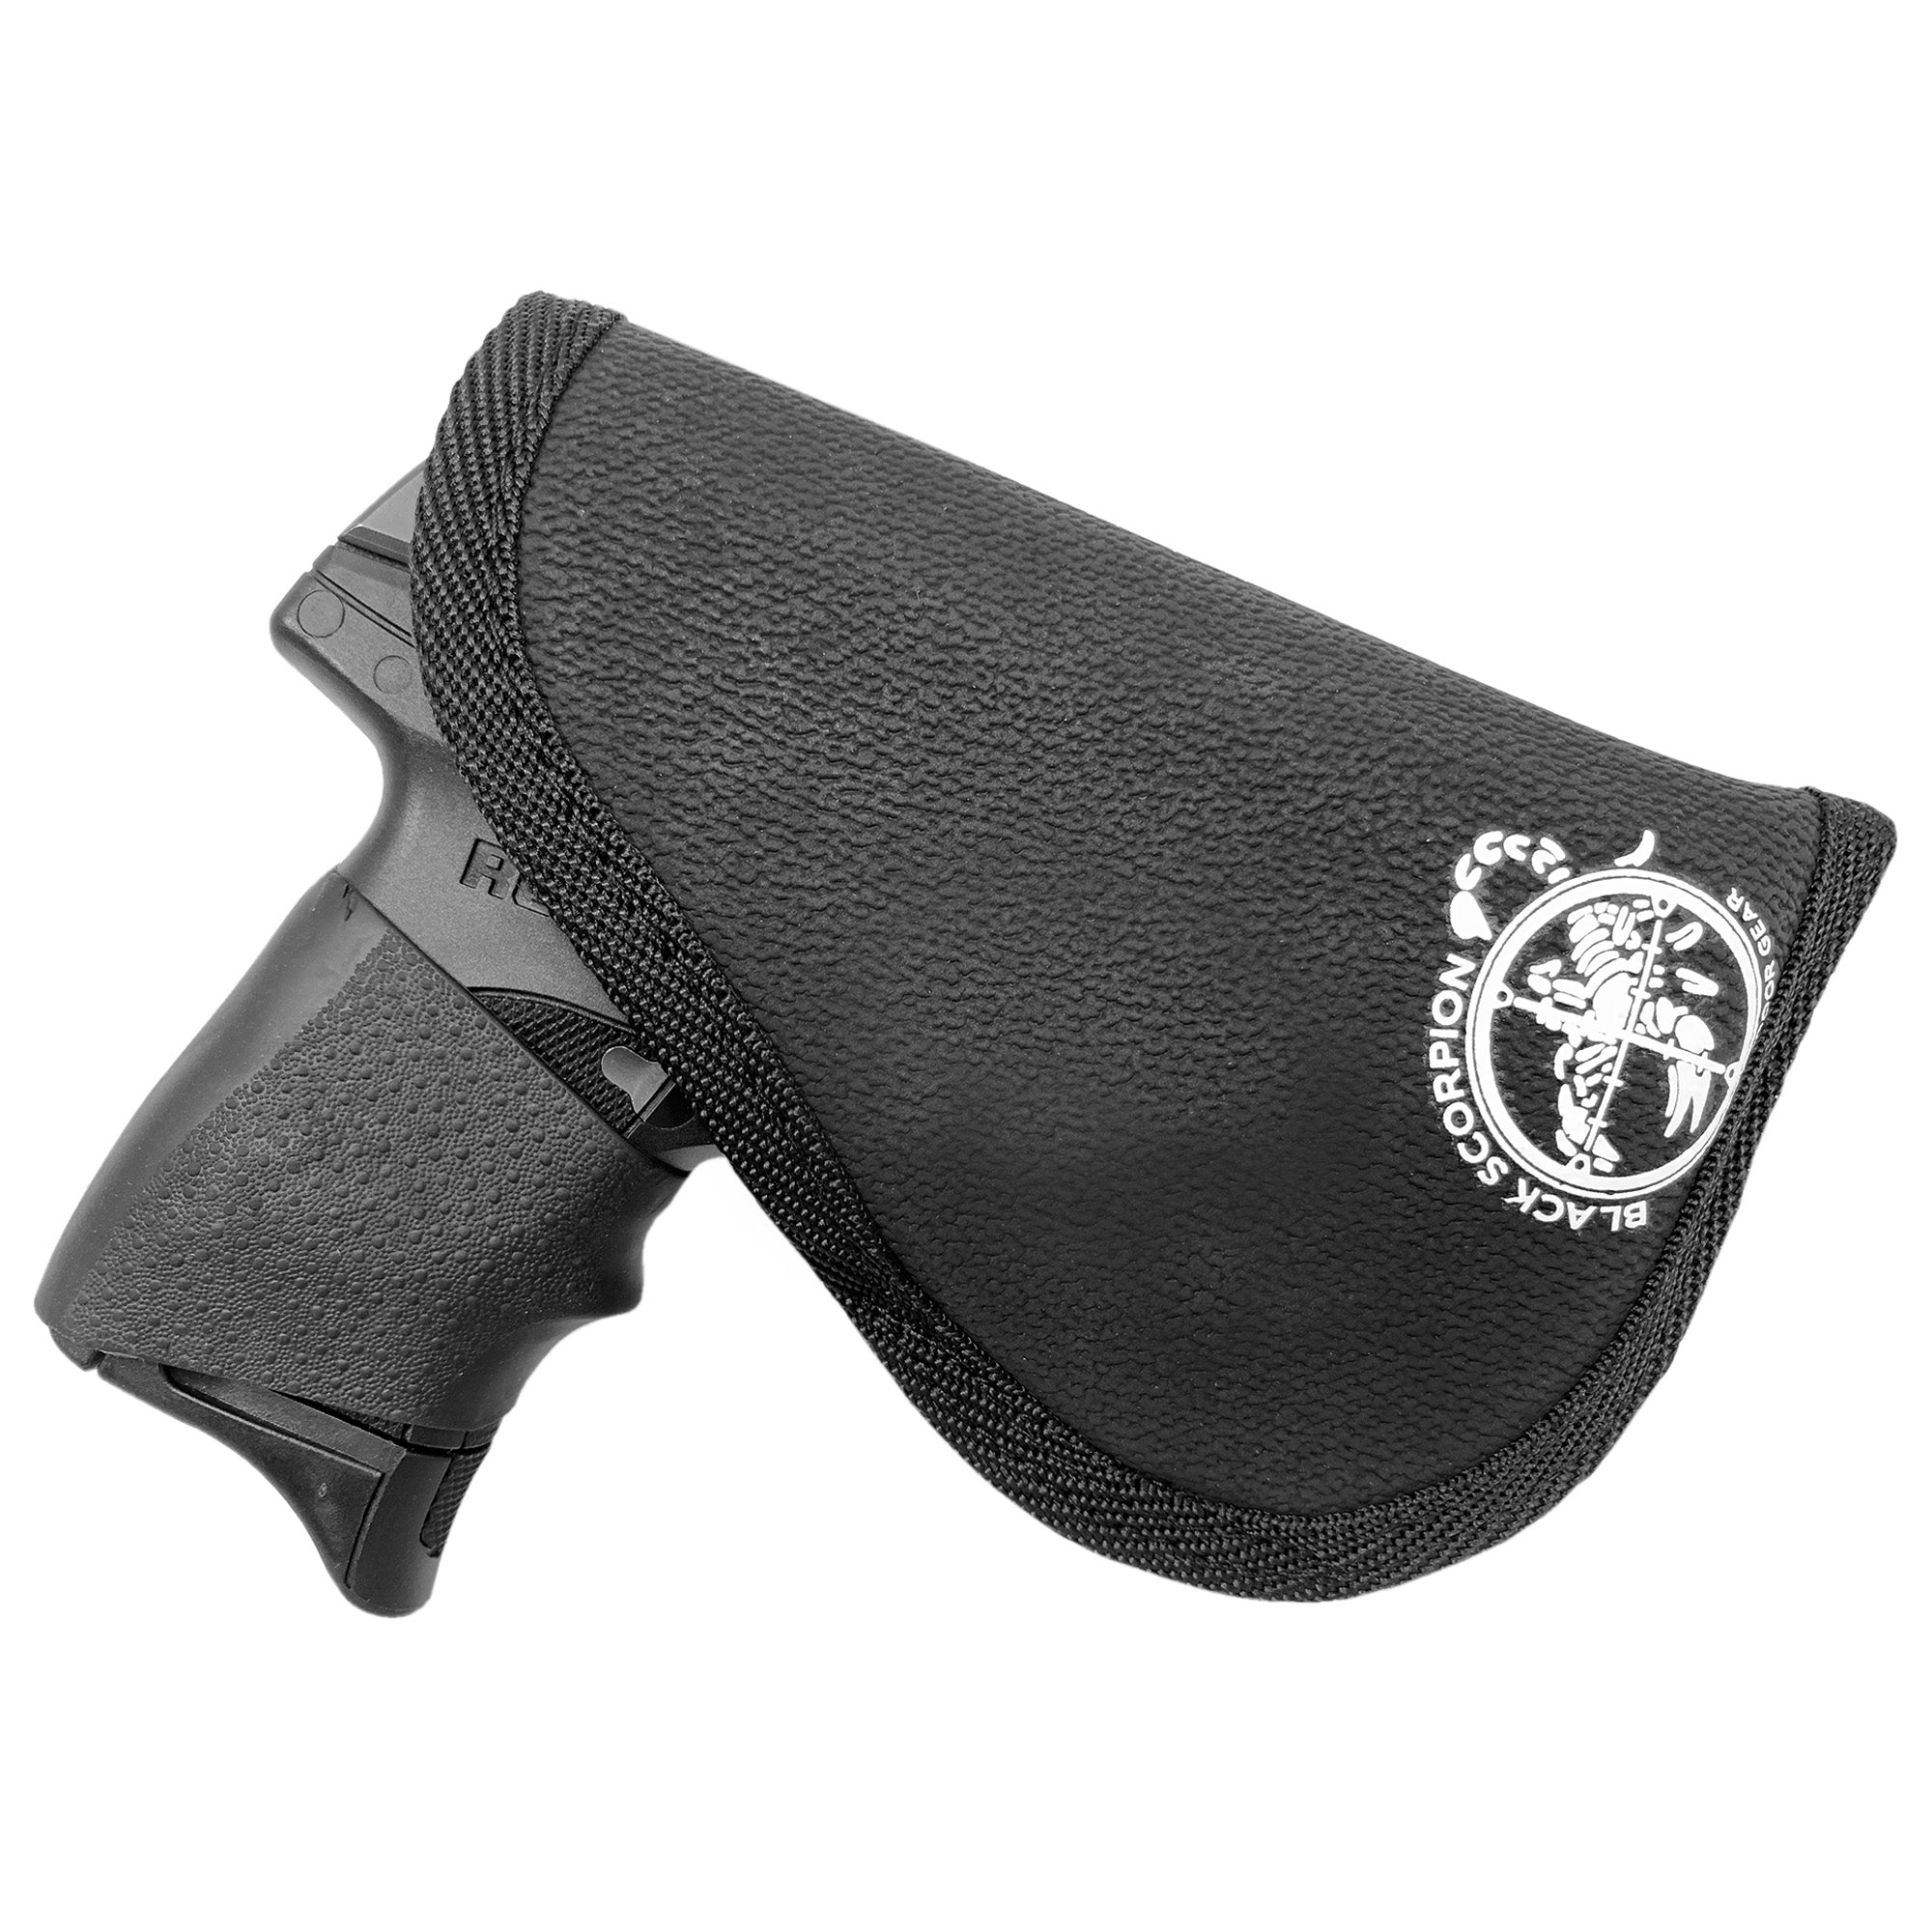 Body Grip Holster fits Small 9mm with Light/Laser Up to 3.3''